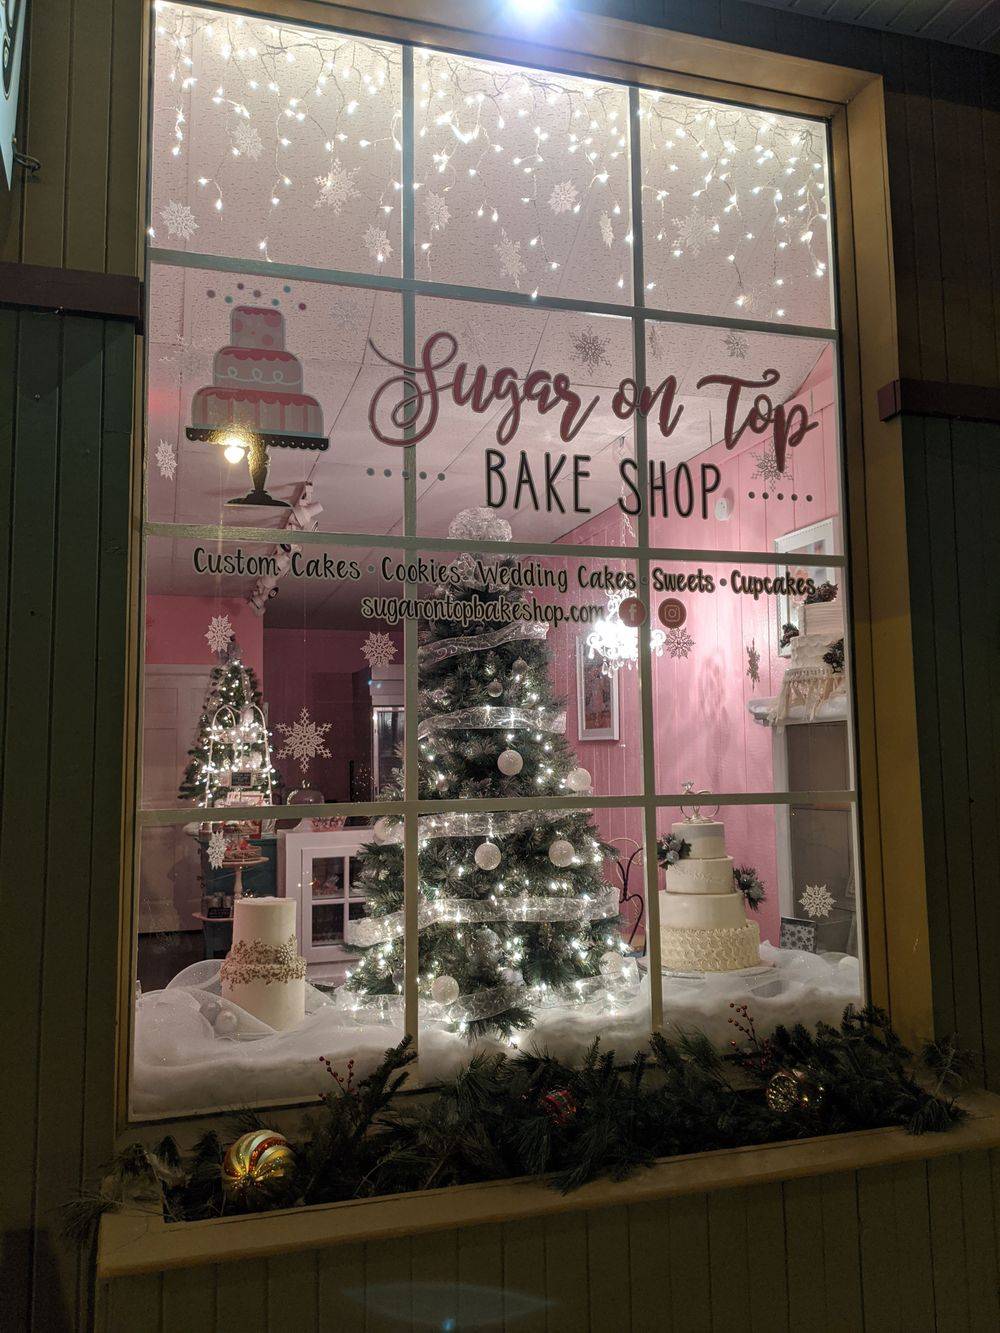 Sugar on Top Bake Shop (open by appointment) | 316 W Main St, Genoa, IL 60135 | Phone: (815) 751-9857